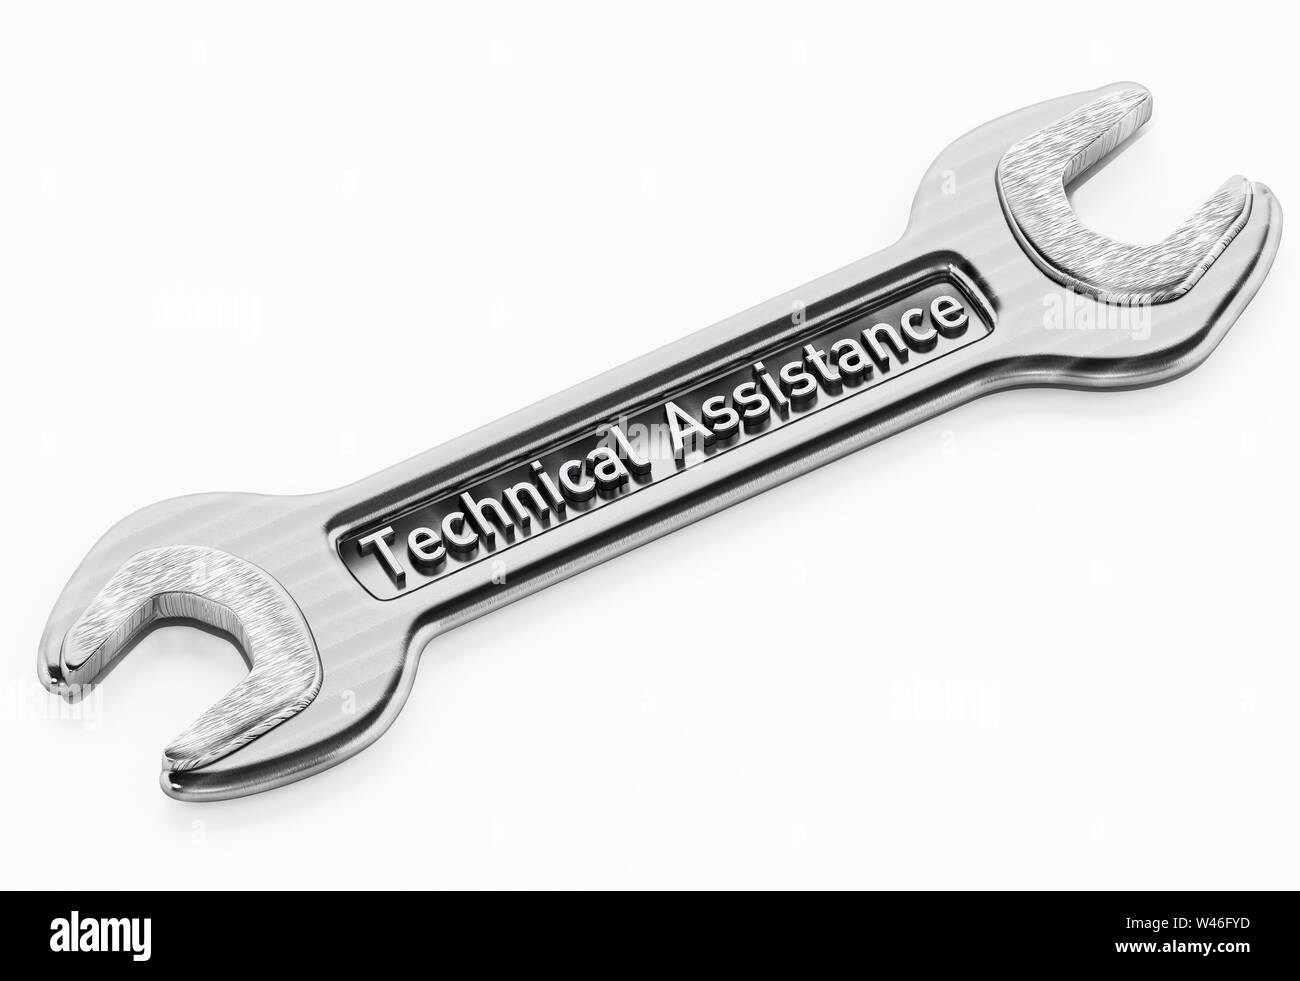 Technical assistance wrench isolated on white background. 3D illustration. Stock Photo